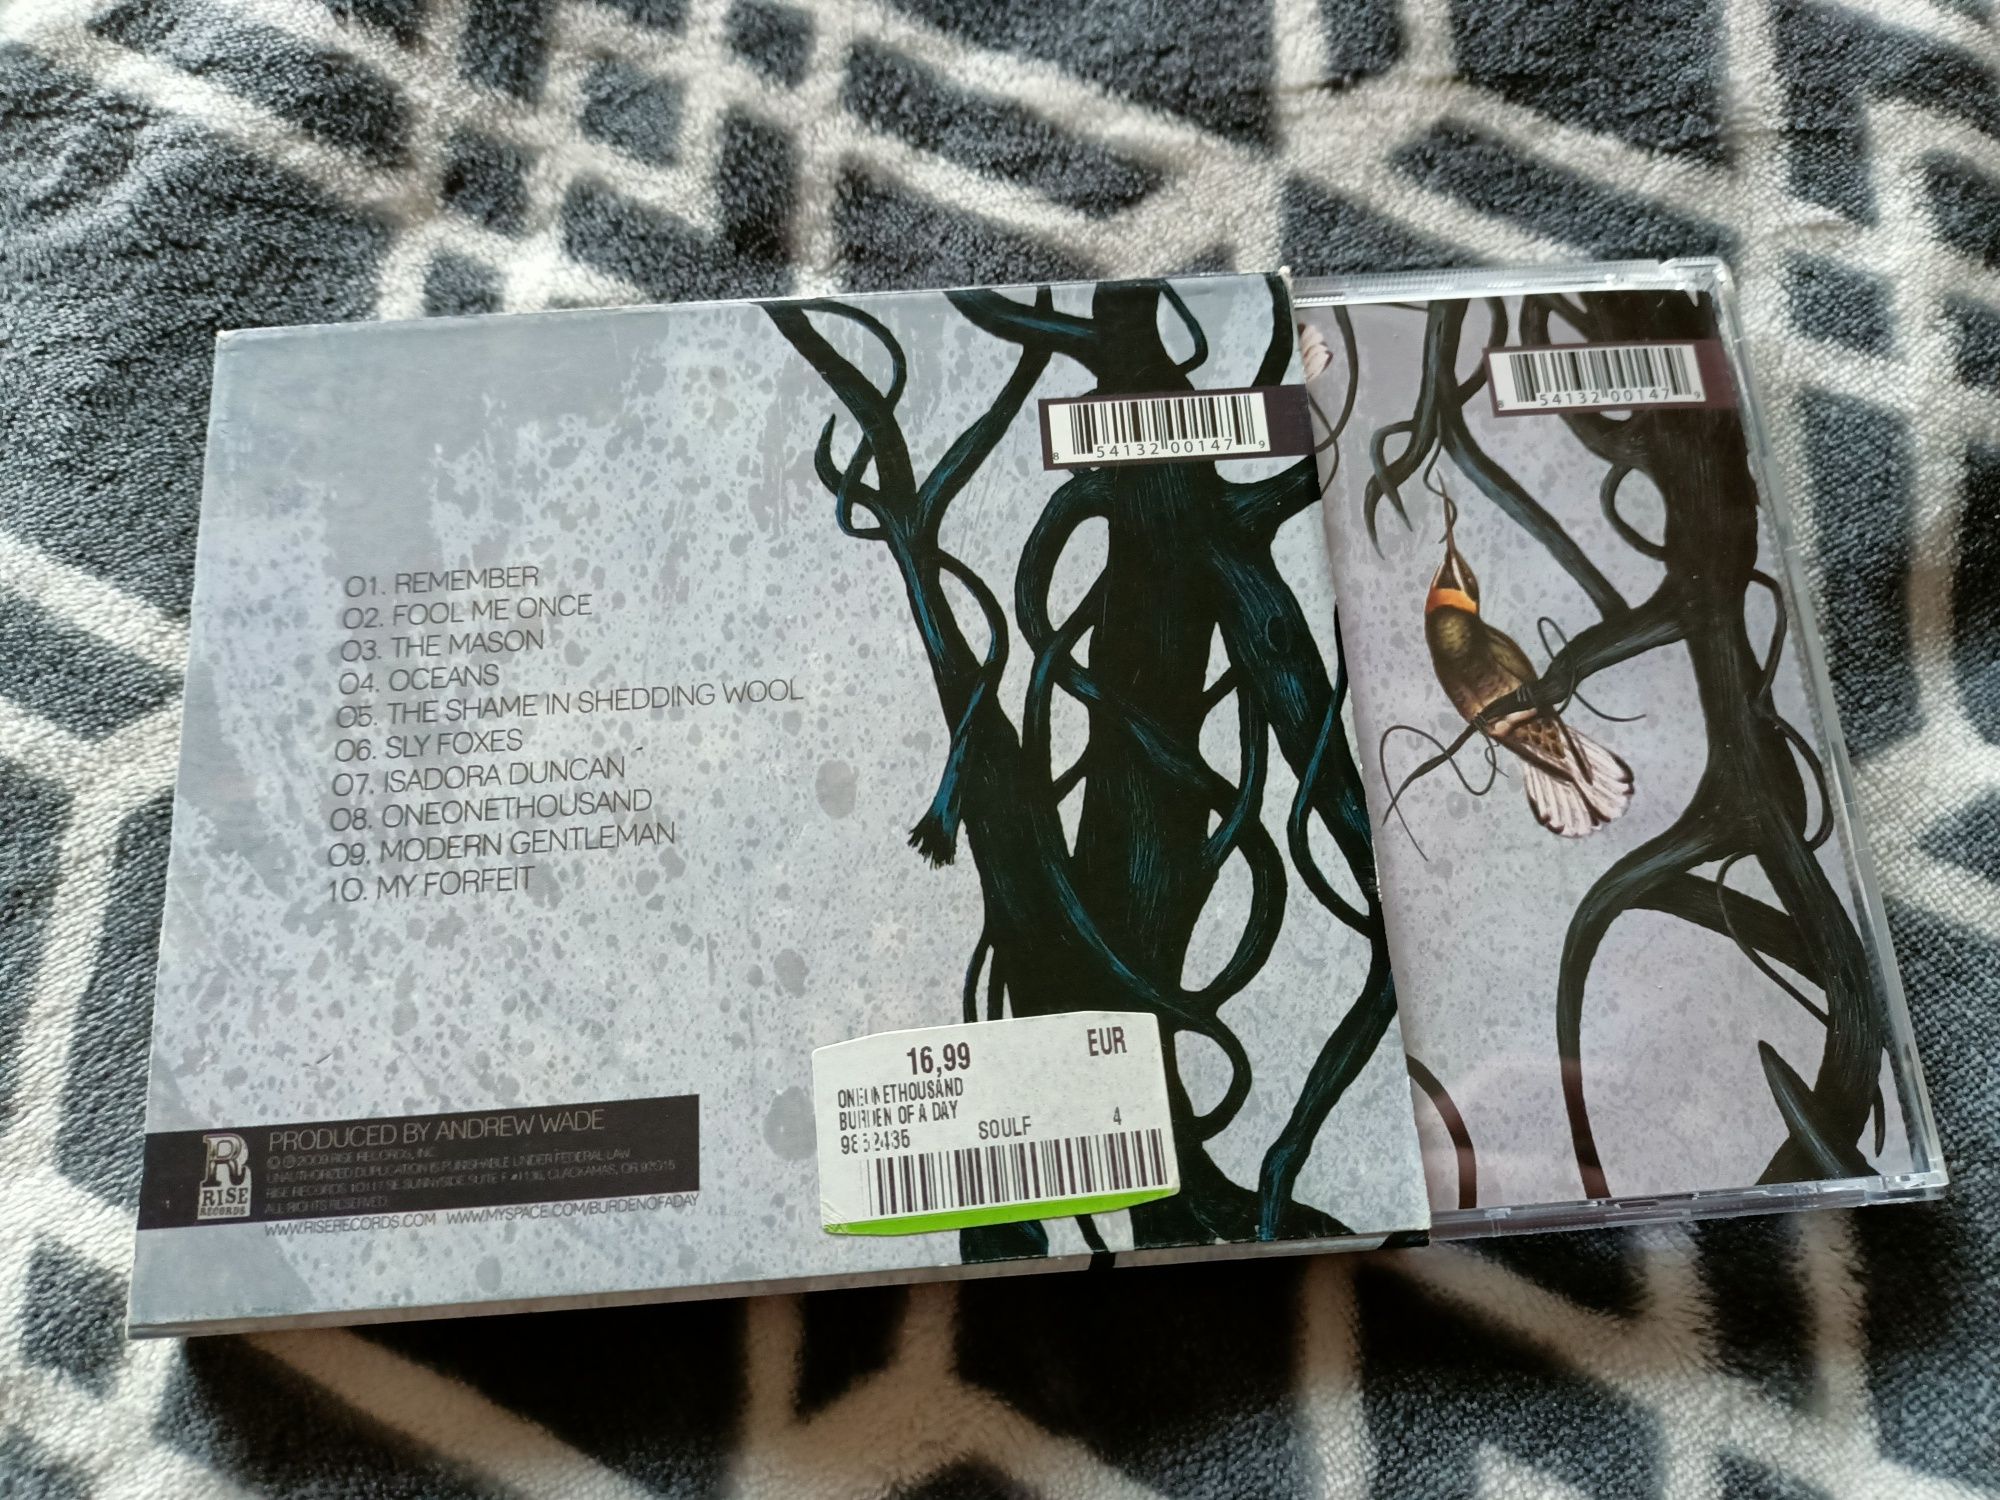 Burden Of A Day - Oneonethousand (Slipcase)(nm)